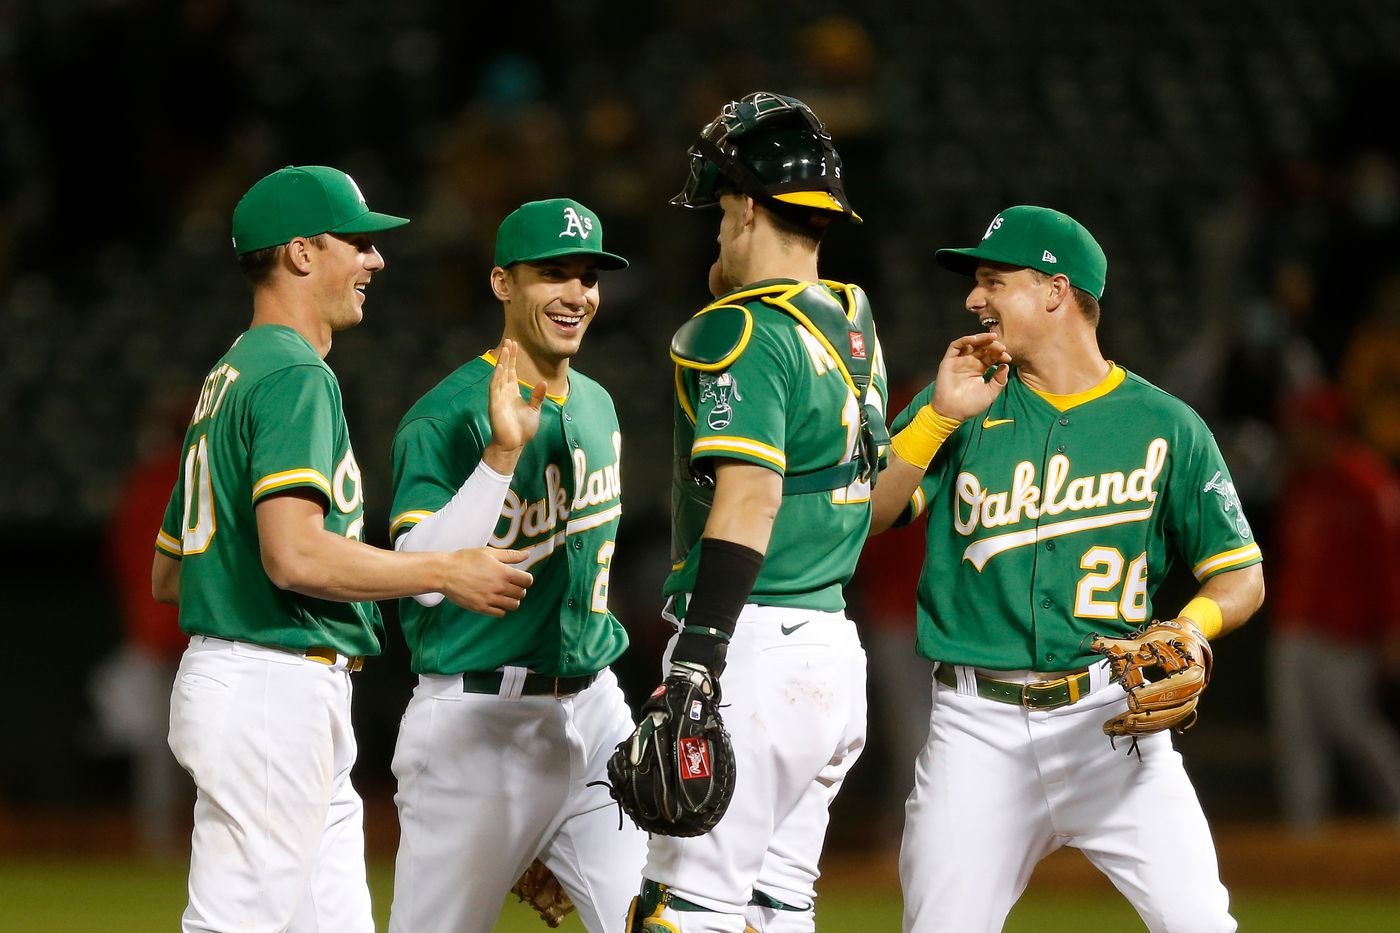 Oakland Athletics players high-fiving